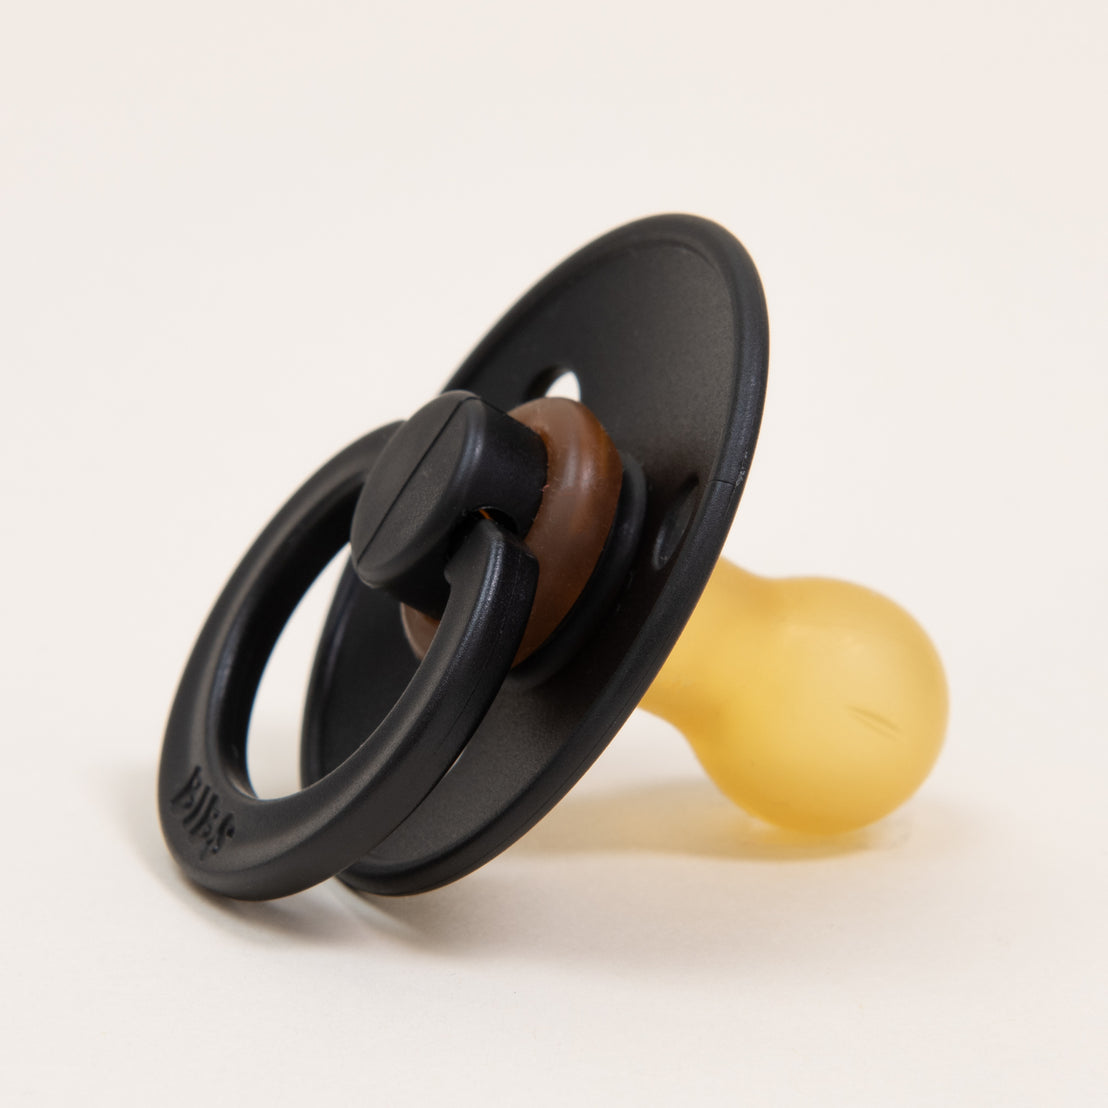 A close-up image of a Bibs Pacifier in Black with a translucent yellow nipple, placed against a plain light background.